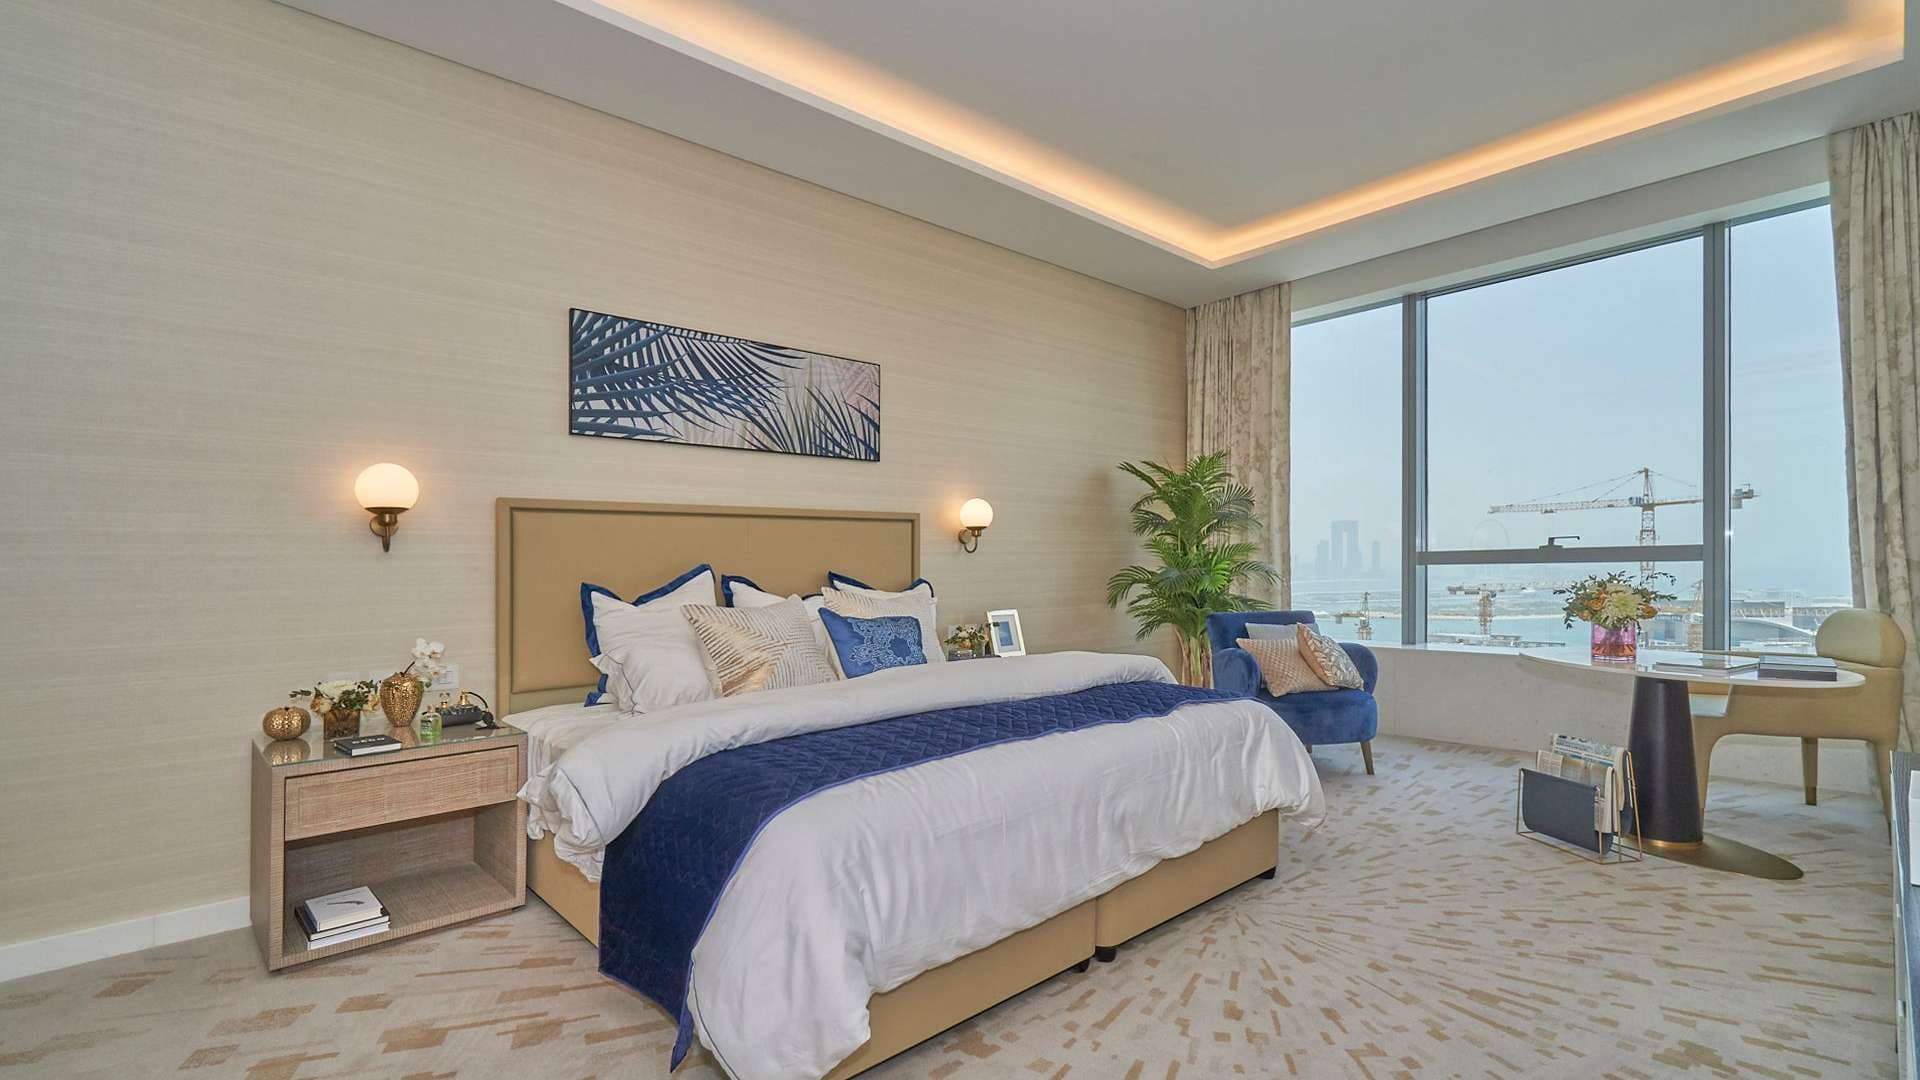 Studio Bedroom Apartment For Sale The Palm Tower Lp08384 86fdcd91faef380.jpeg